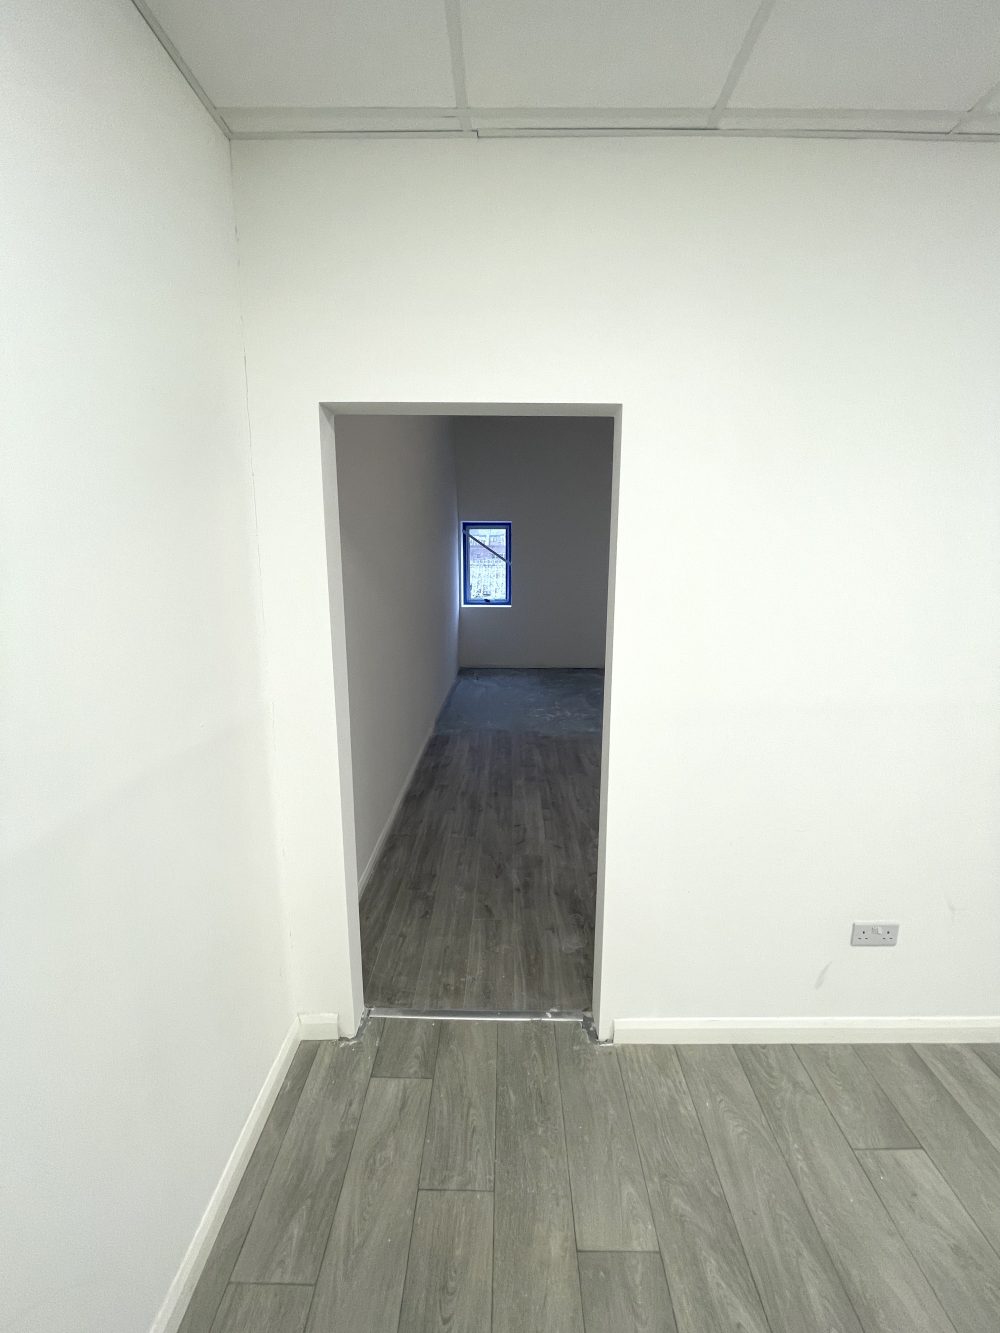 First floor office space : light idustrial creative artist studio to rent in E18 S South Woodford Pic 16